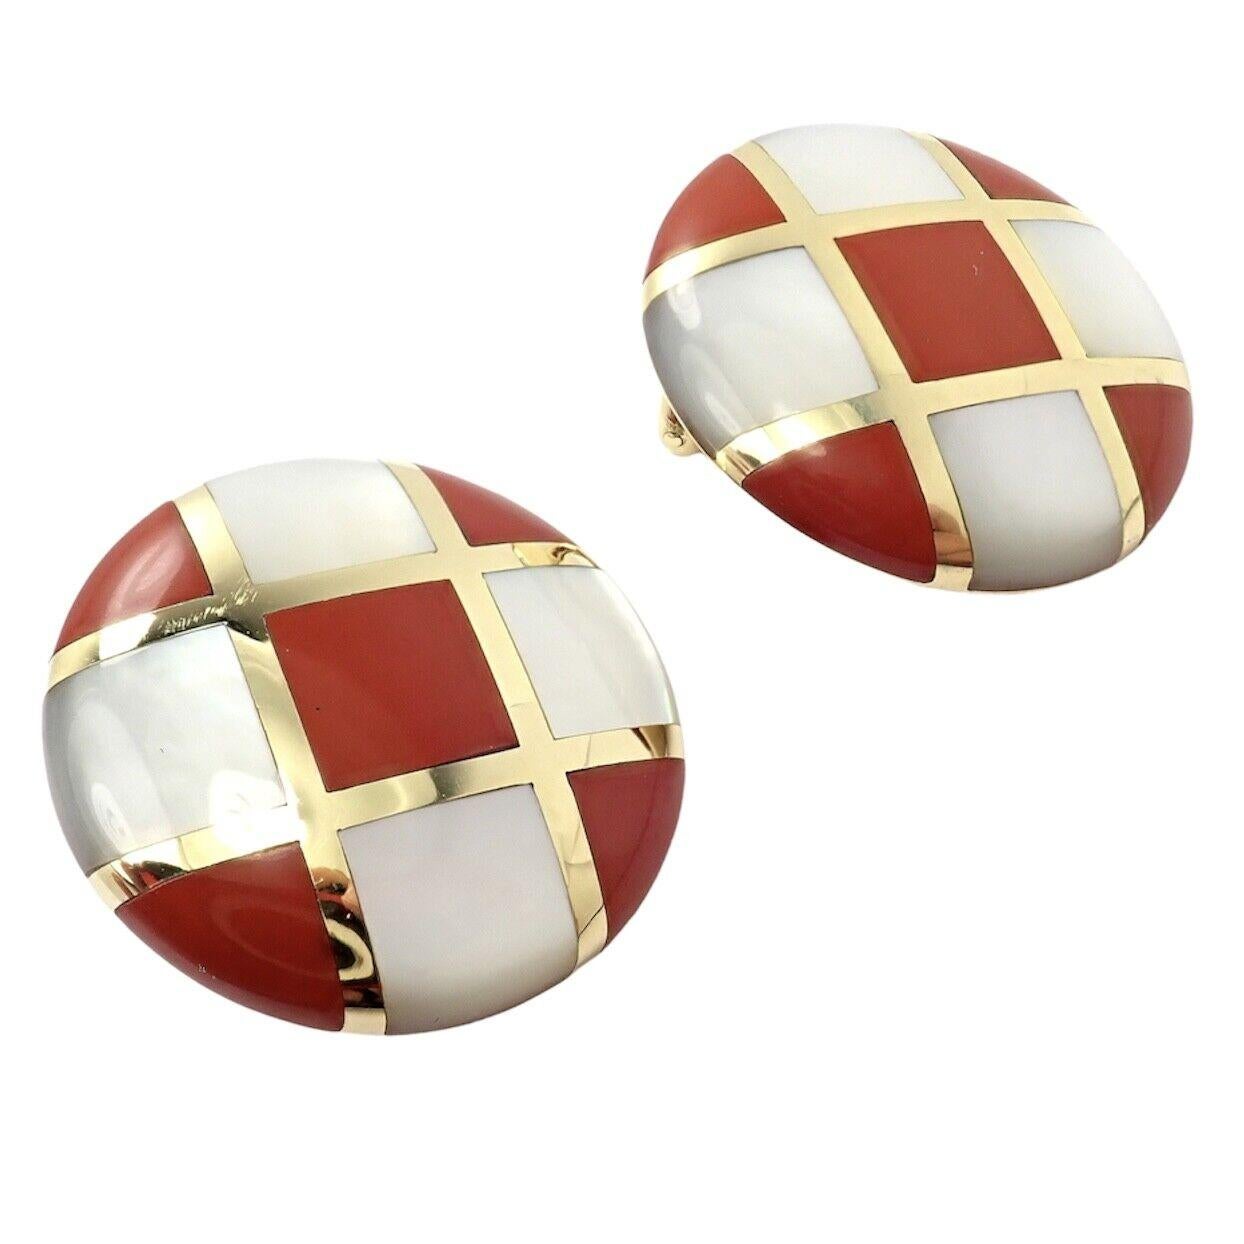 18k Yellow Gold Mother Of Pearl Carnelian Checkboard Large Earrings by Angela Cummings for Tiffany & Co.
With Carnelian and Mother of Pearl Checkerboard Design by Angela Cummings
These earrings are for not pierced ears, but they can be converted by